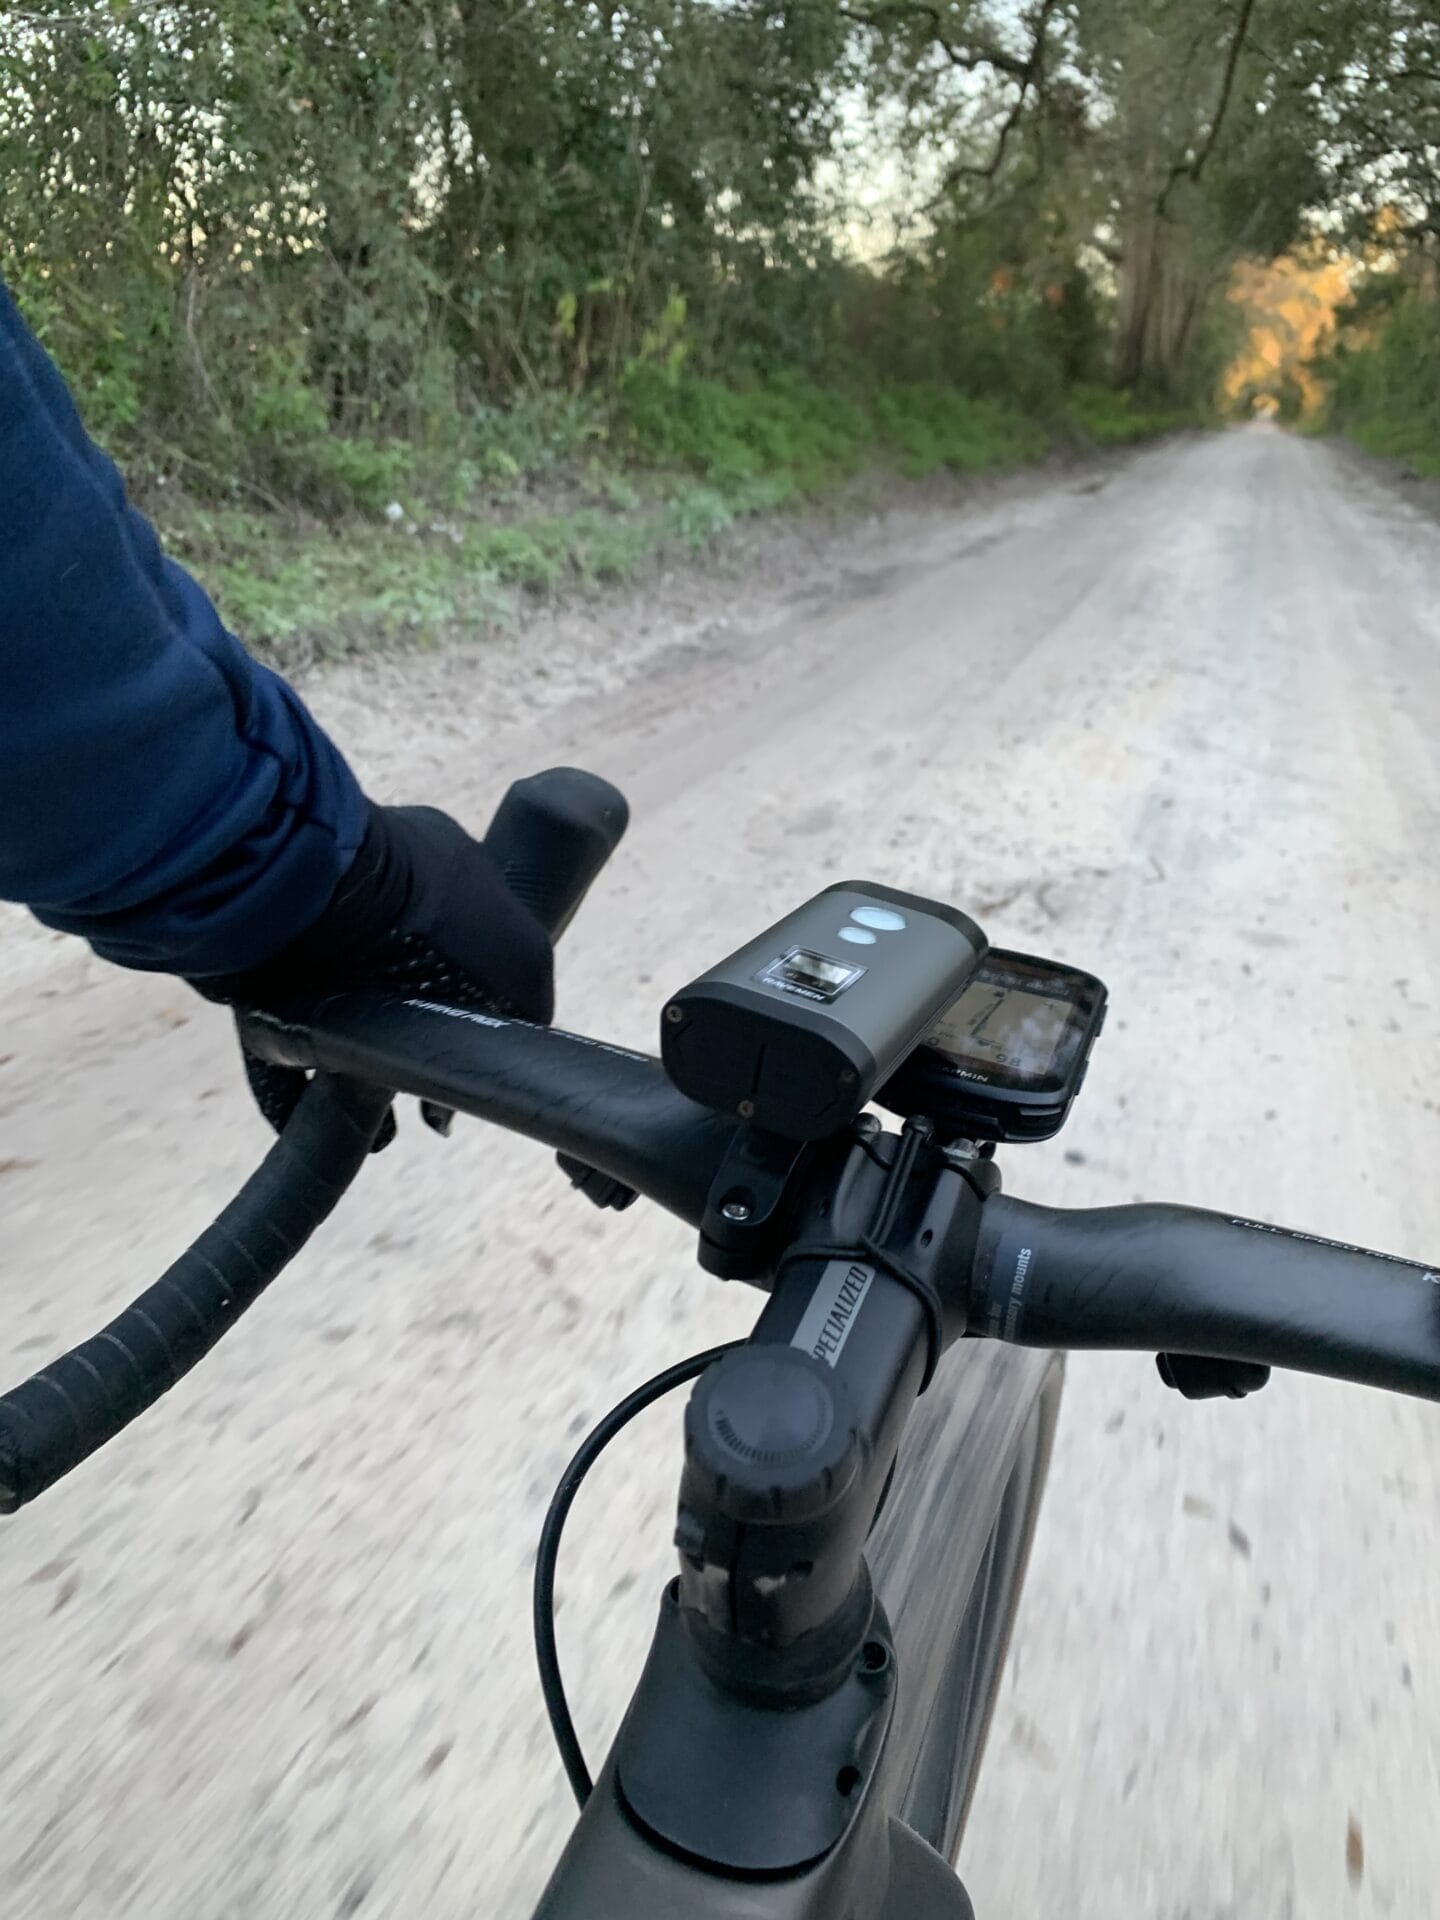 POV of Ravement PR2000 with the Garmin computer installed on an out front mount